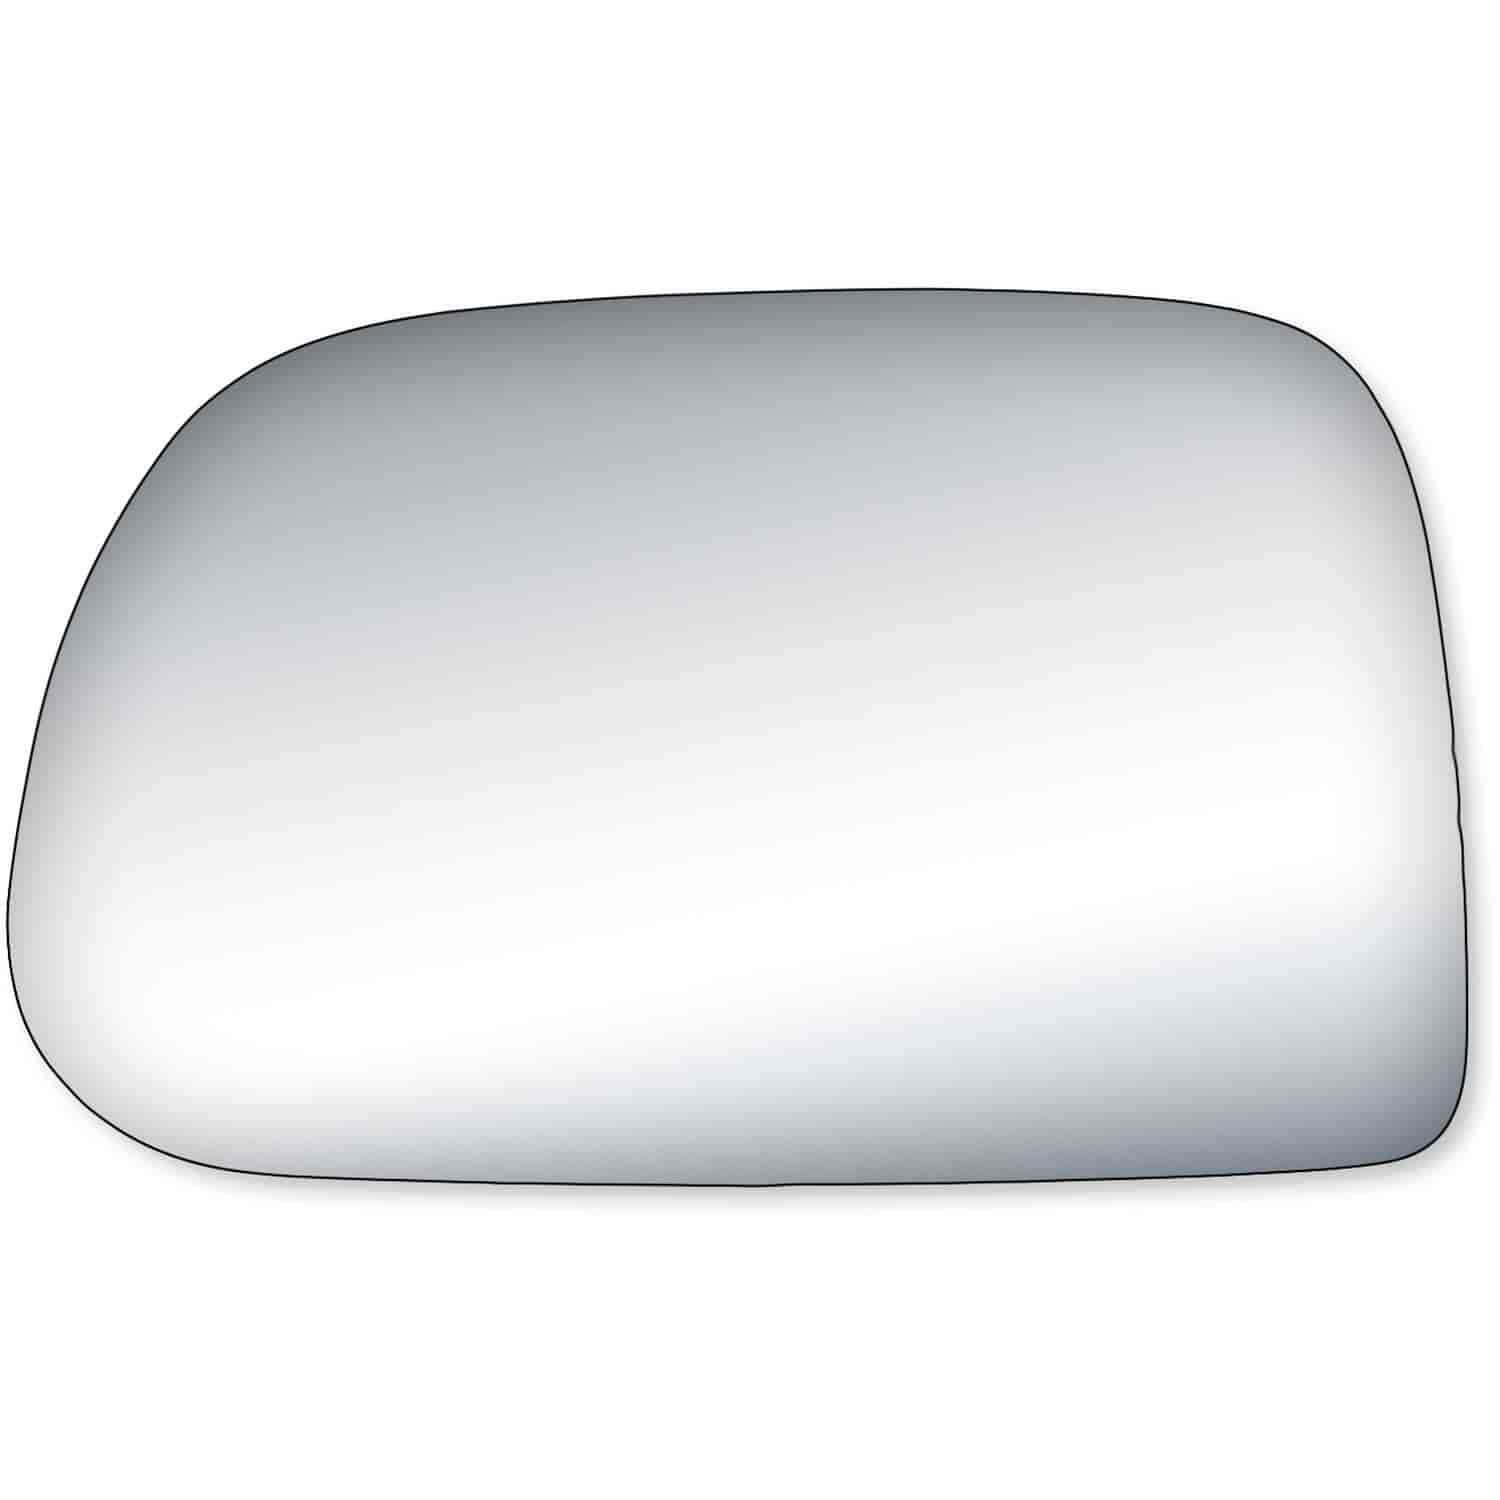 Replacement Glass for 01-04 Tacoma the glass measures 4 5/8 tall by 7 1/2 wide and 7 11/16 diagonall